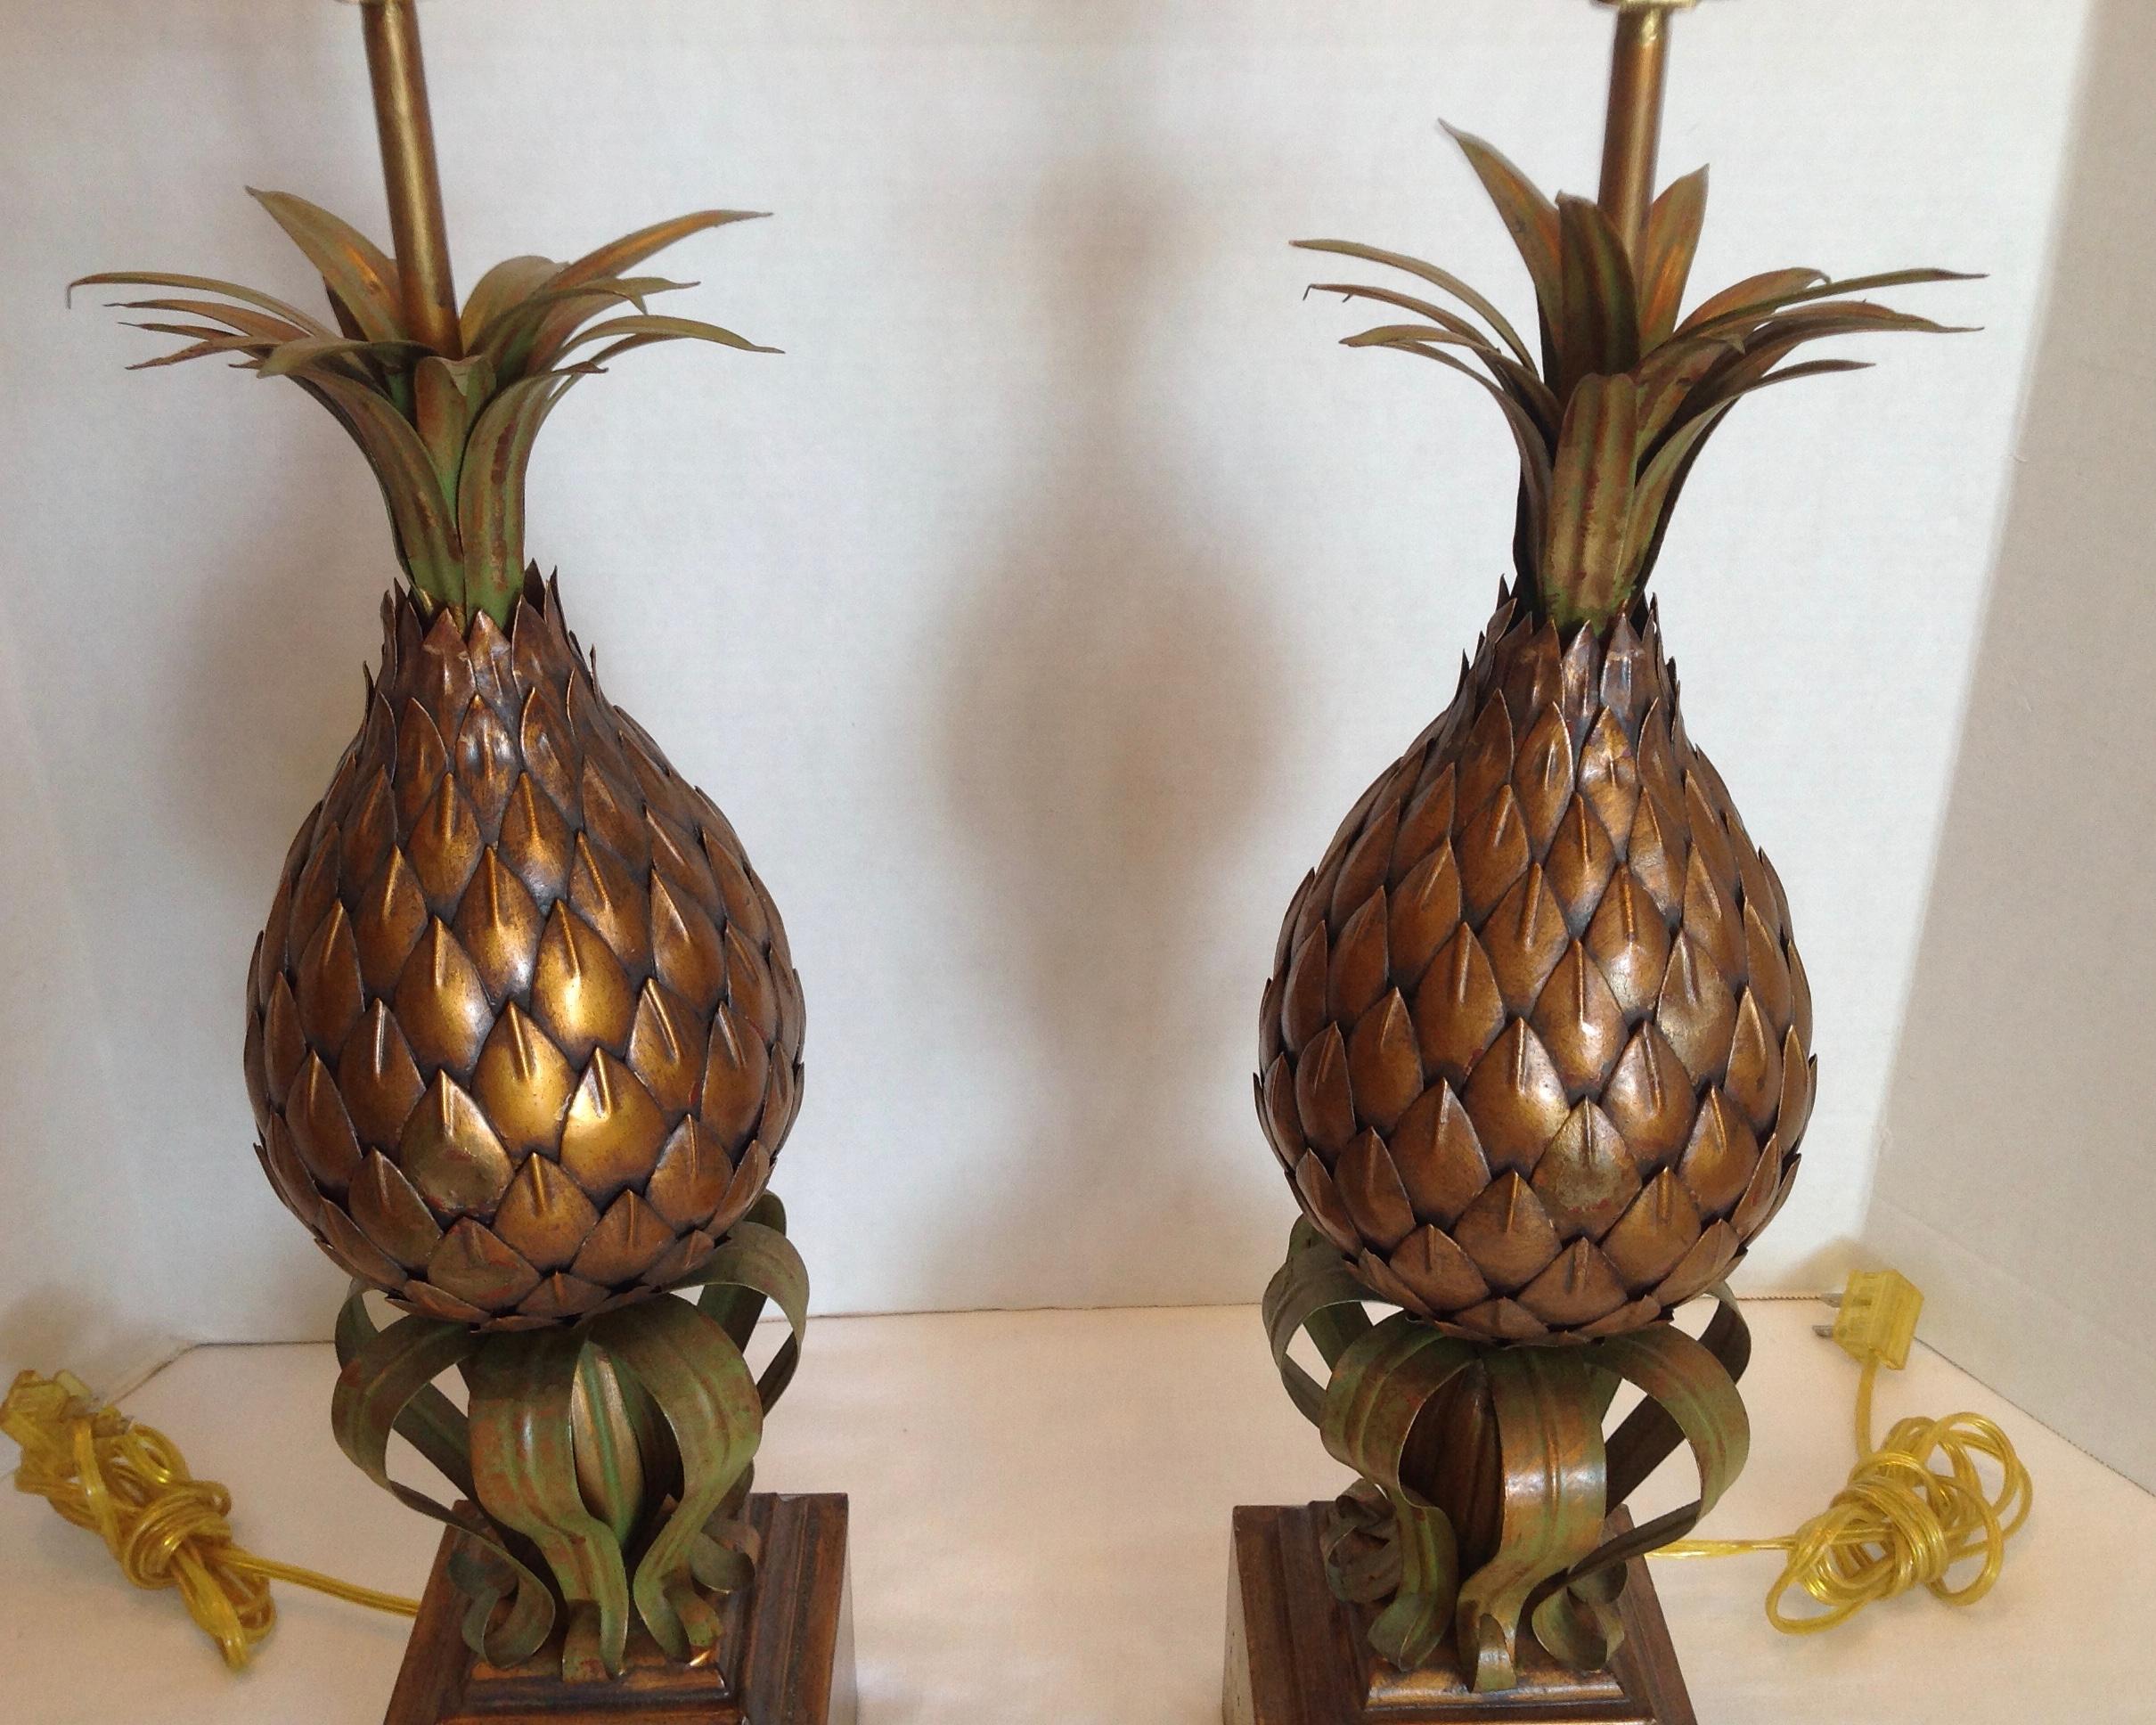 Pair of Midcentury Tole Pineapple Lamps In Good Condition For Sale In West Palm Beach, FL